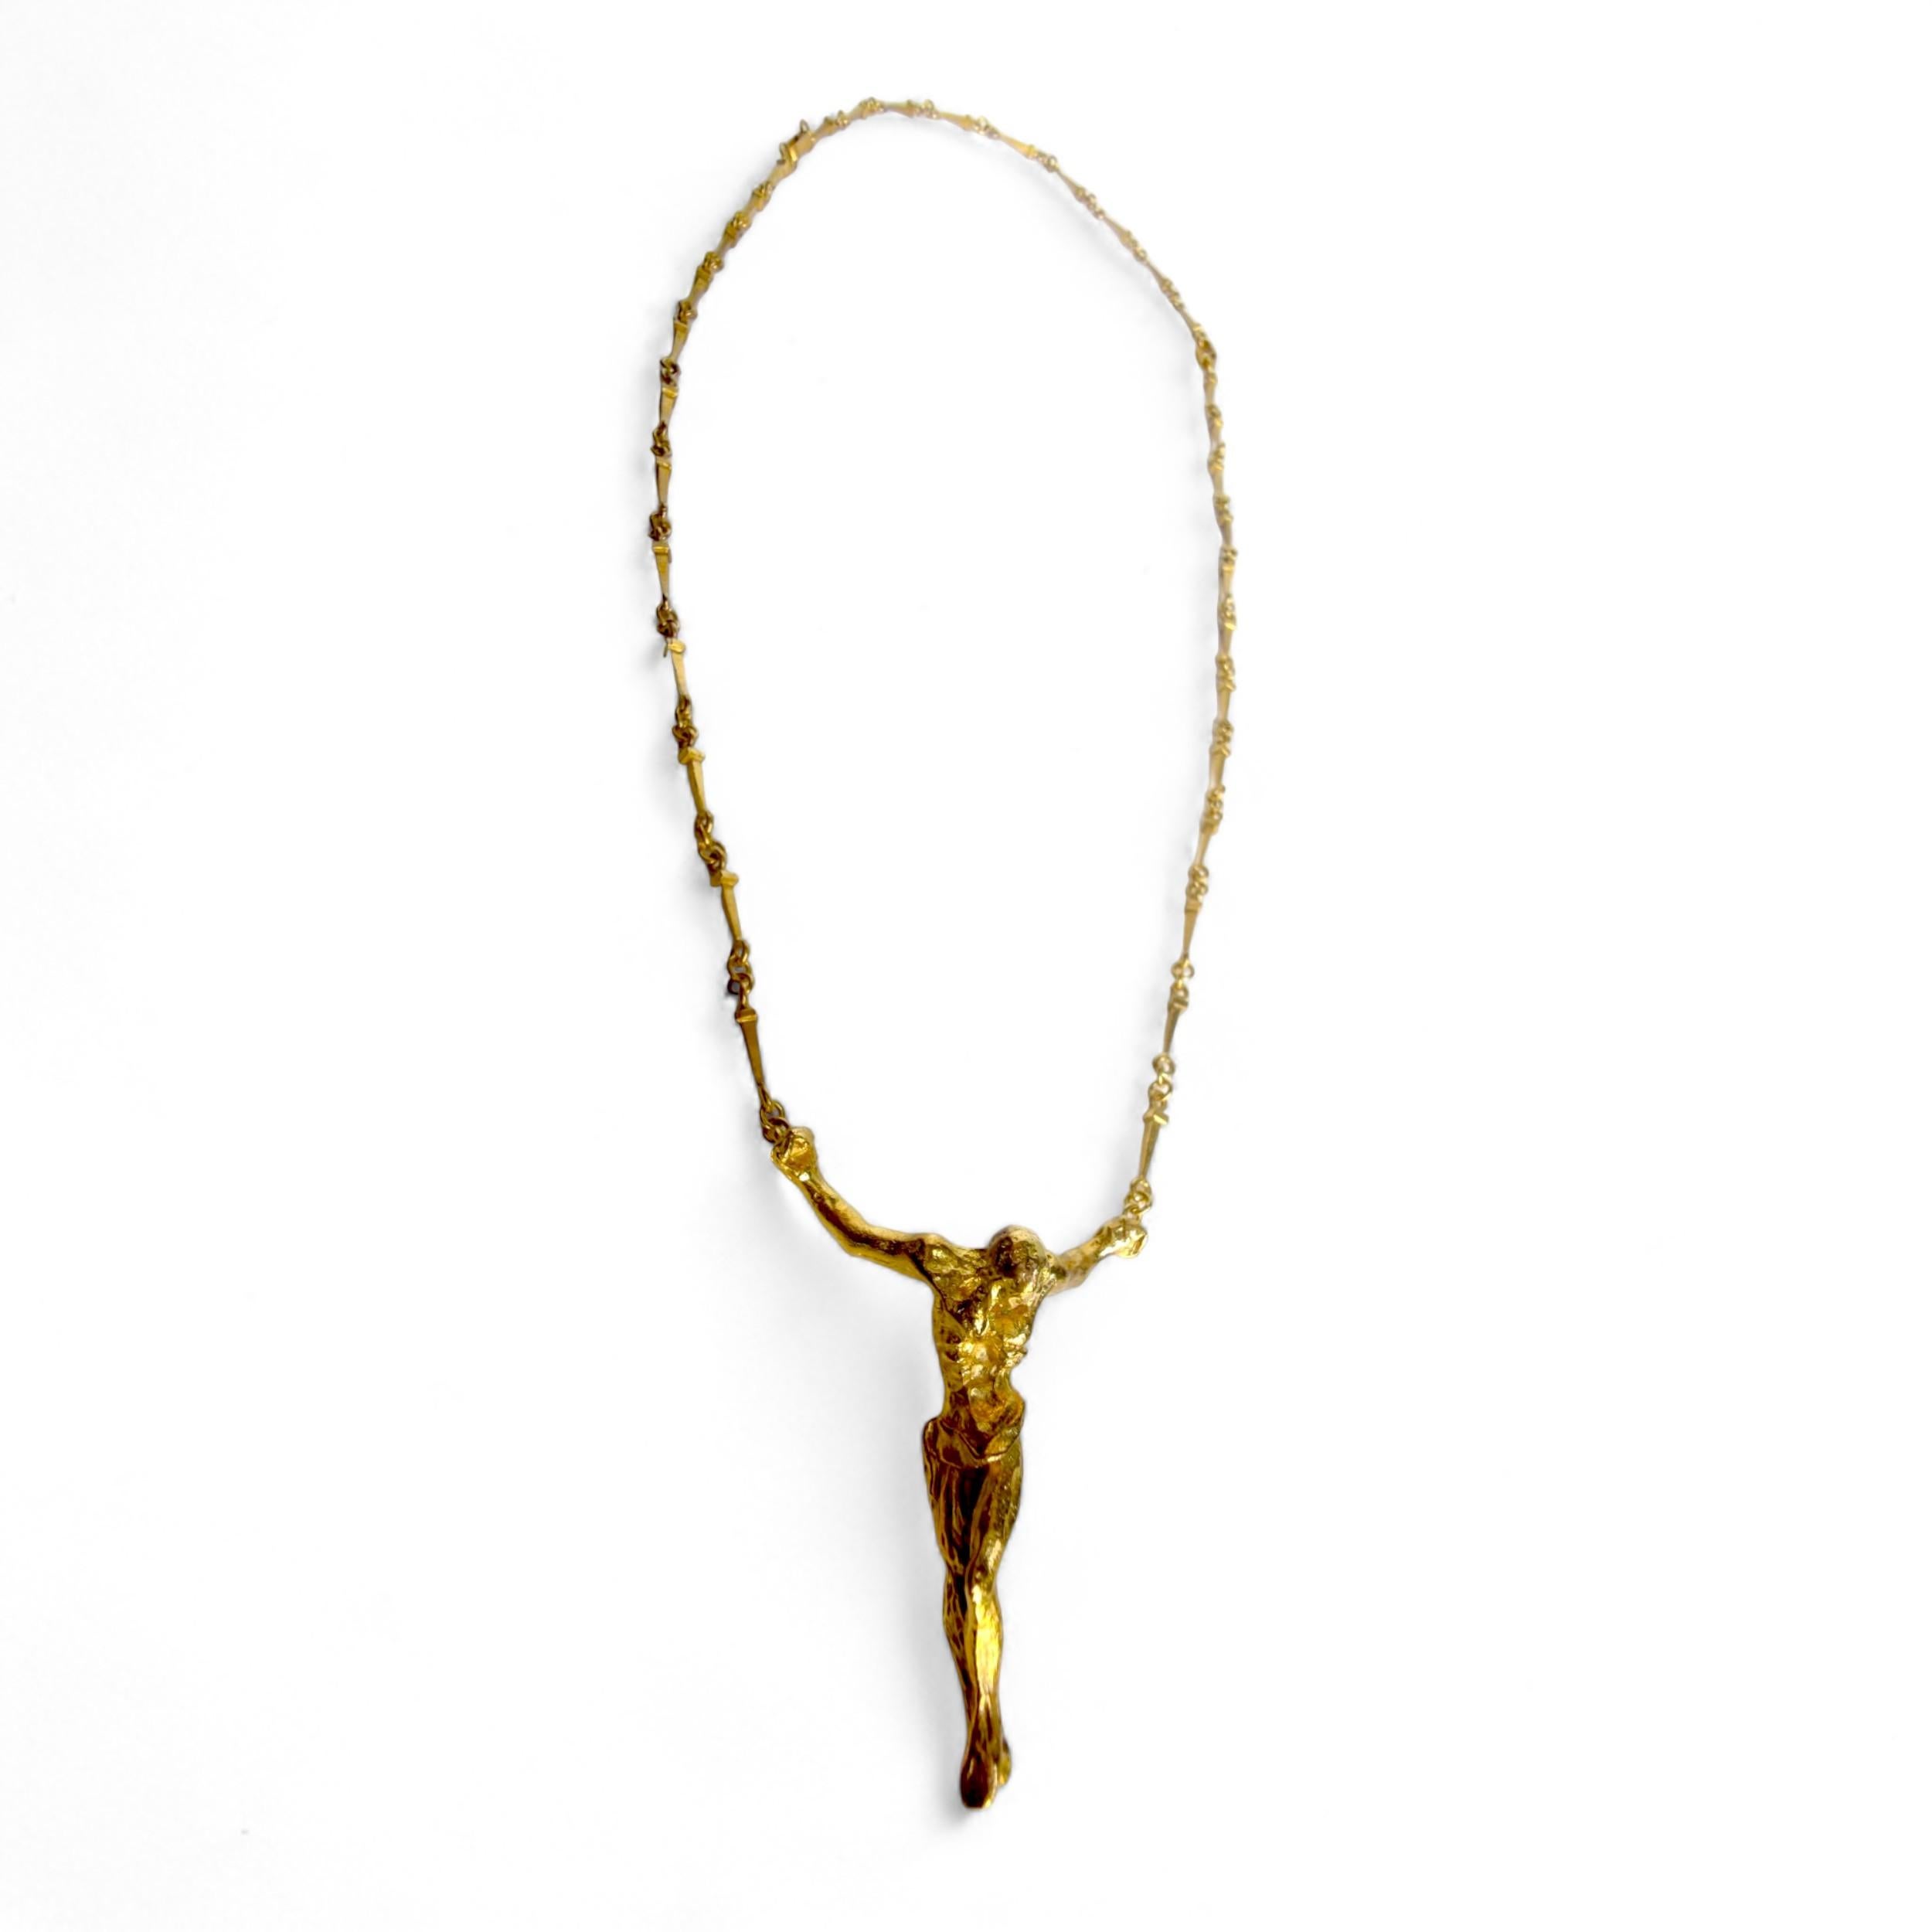 Exclusive Dalí 18K solid gold 'St. John Cross' Necklace #A-821 - With Provenance For Sale 1